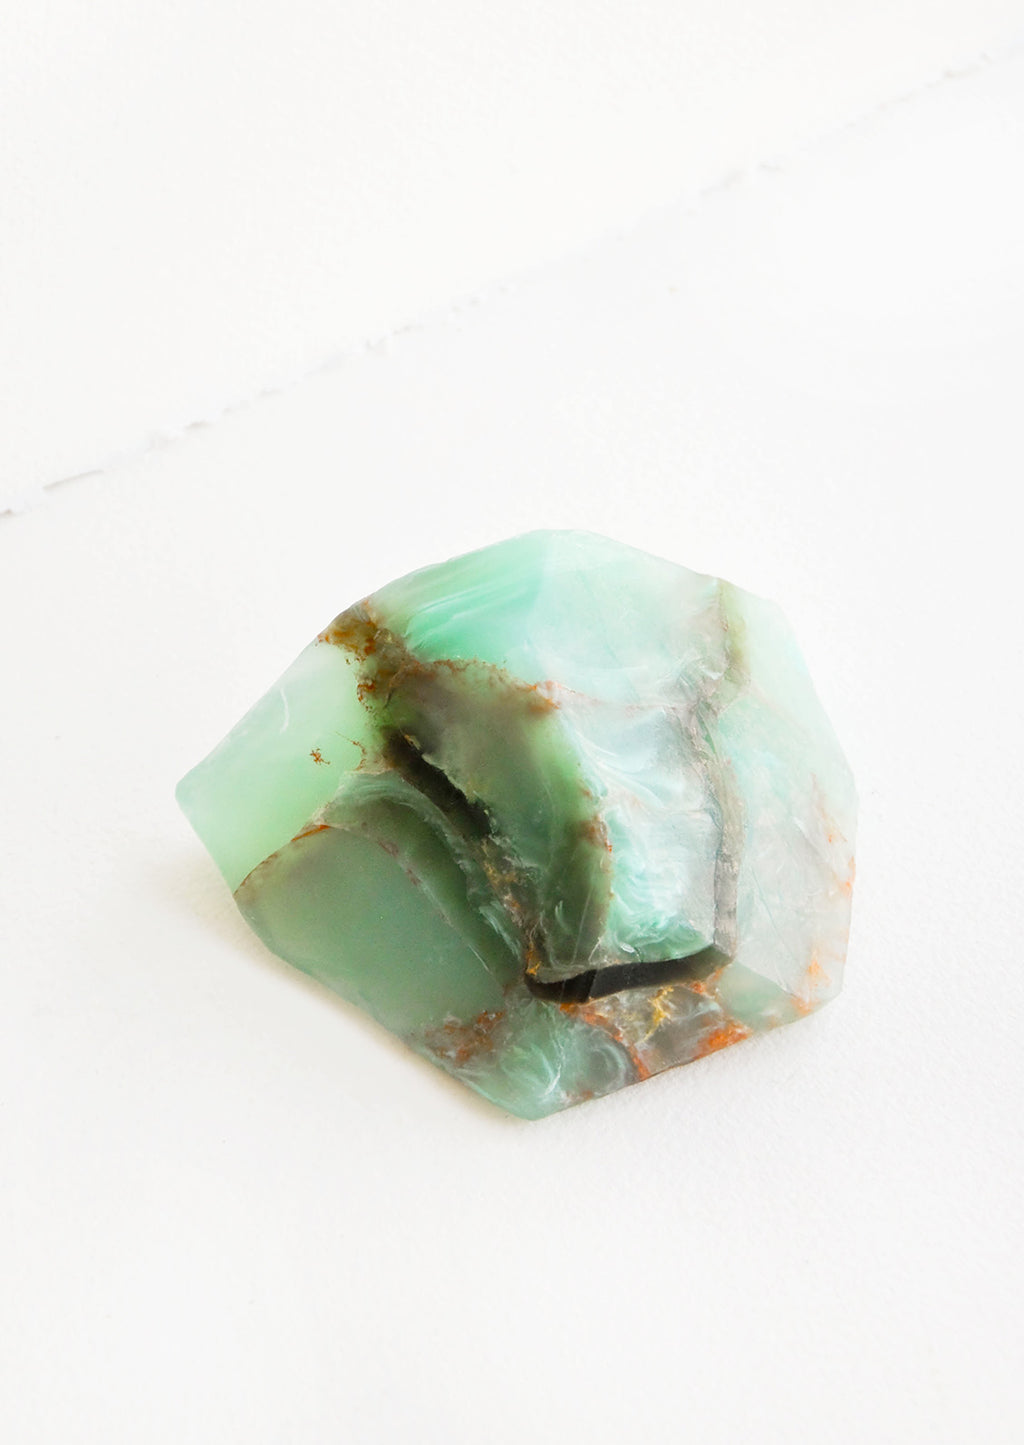 Jade: Bar soap in the form of a realistic looking jade gemstone